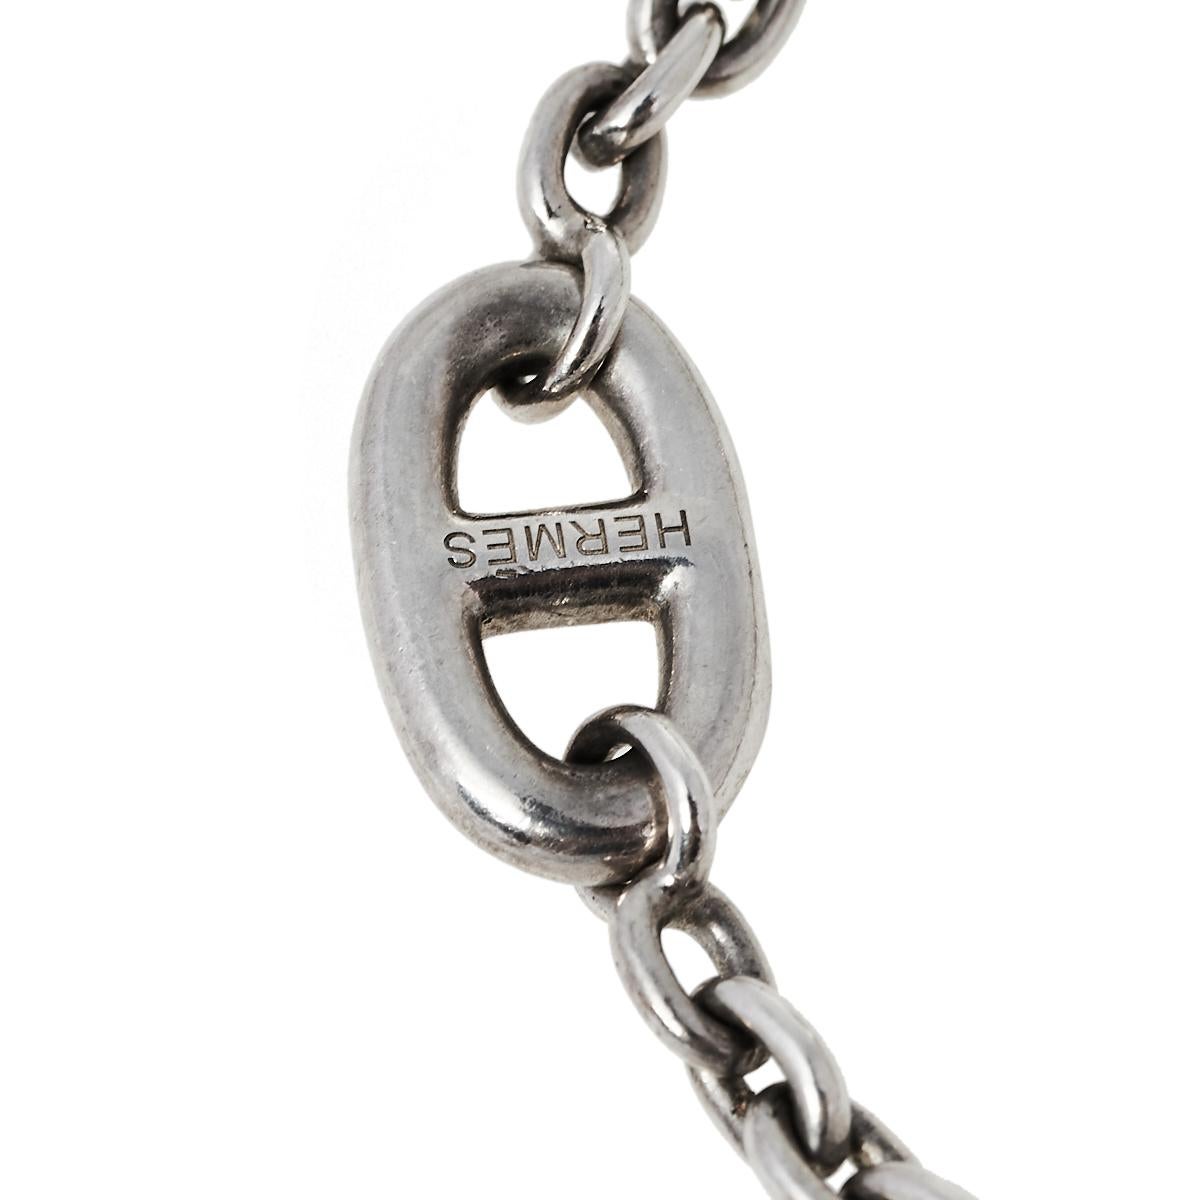 This bracelet is from Hermés’ nautical-inspired ‘Chain d’Ancre collection.’ The collection was specifically designed to reflect the elegance of a boat’s chain-link line to its anchor. Sculpted as a bracelet, this sterling silver creation has the